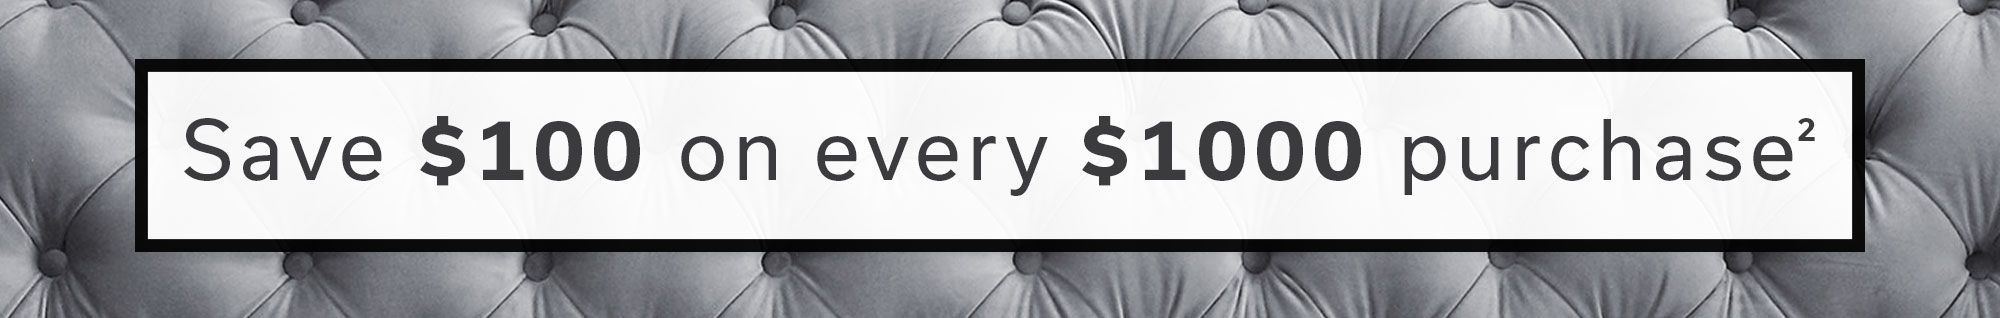 Save $100 off Every $1000